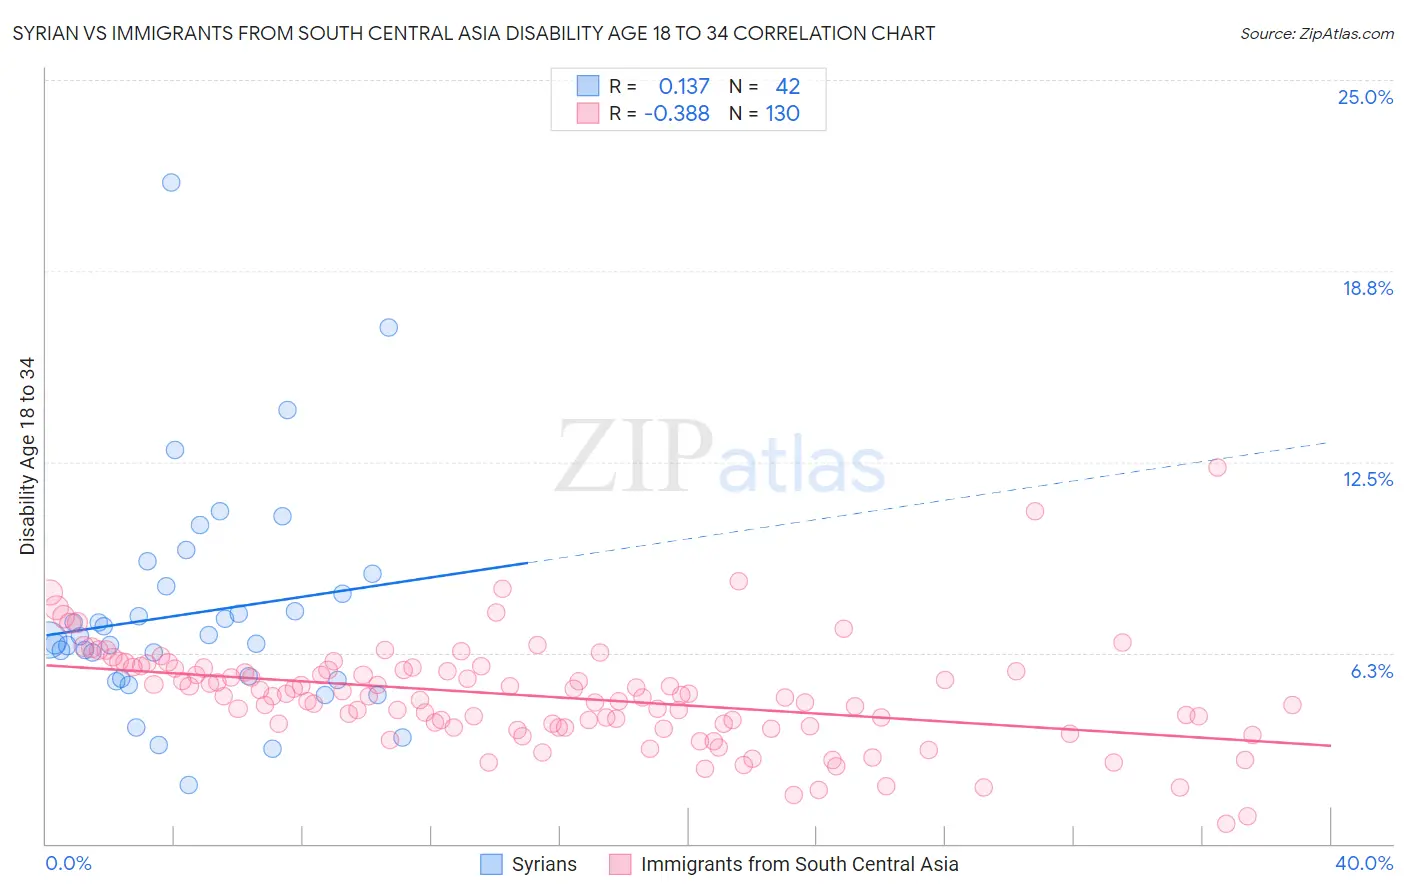 Syrian vs Immigrants from South Central Asia Disability Age 18 to 34